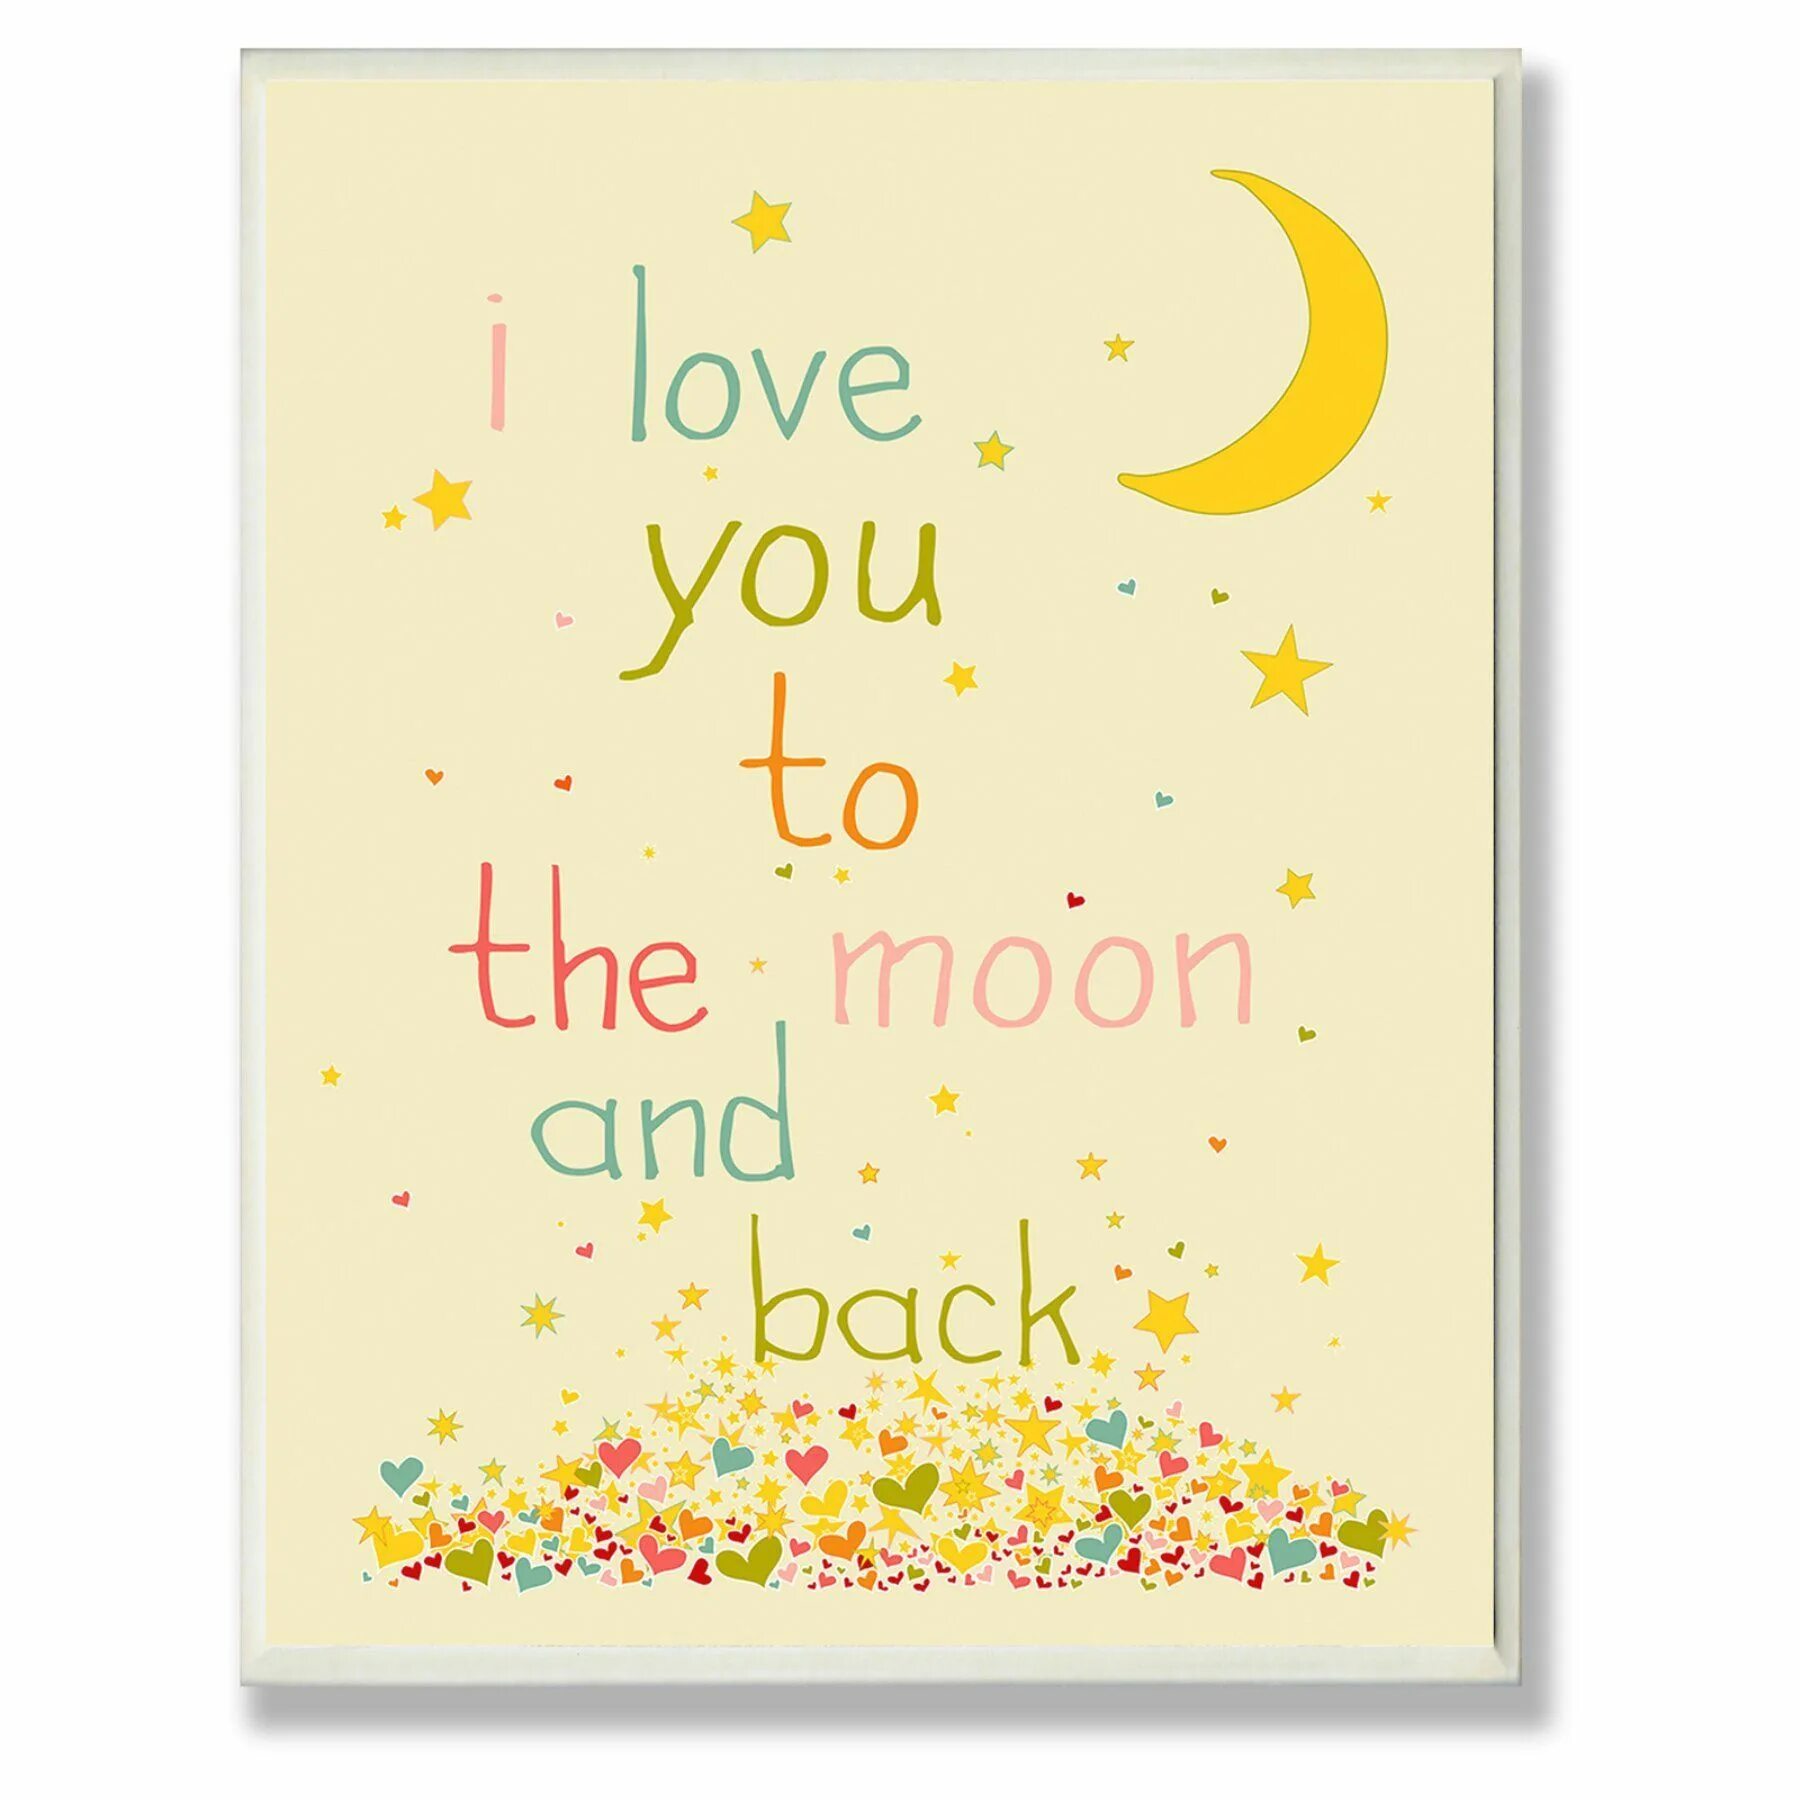 I Love you to the Moon and back. Love to the Moon and back. Love you till the Moon and back. Love you to the moon